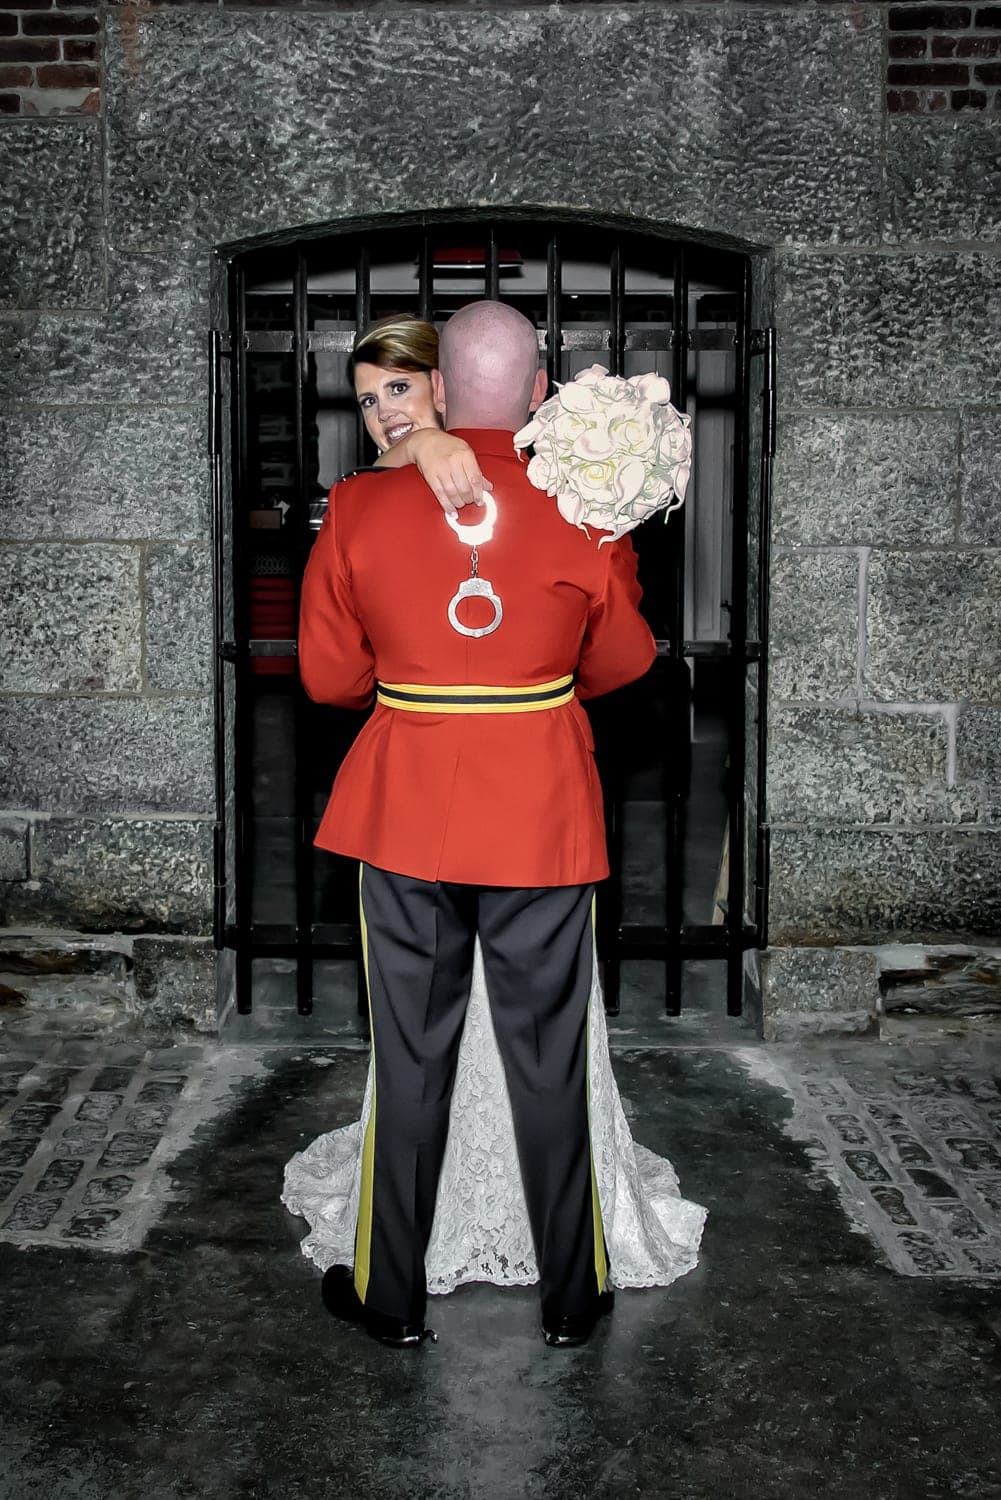 Bride and groom with RCMP handcuffs wedding photos at Alexander Keiths Brewery in Halifax.